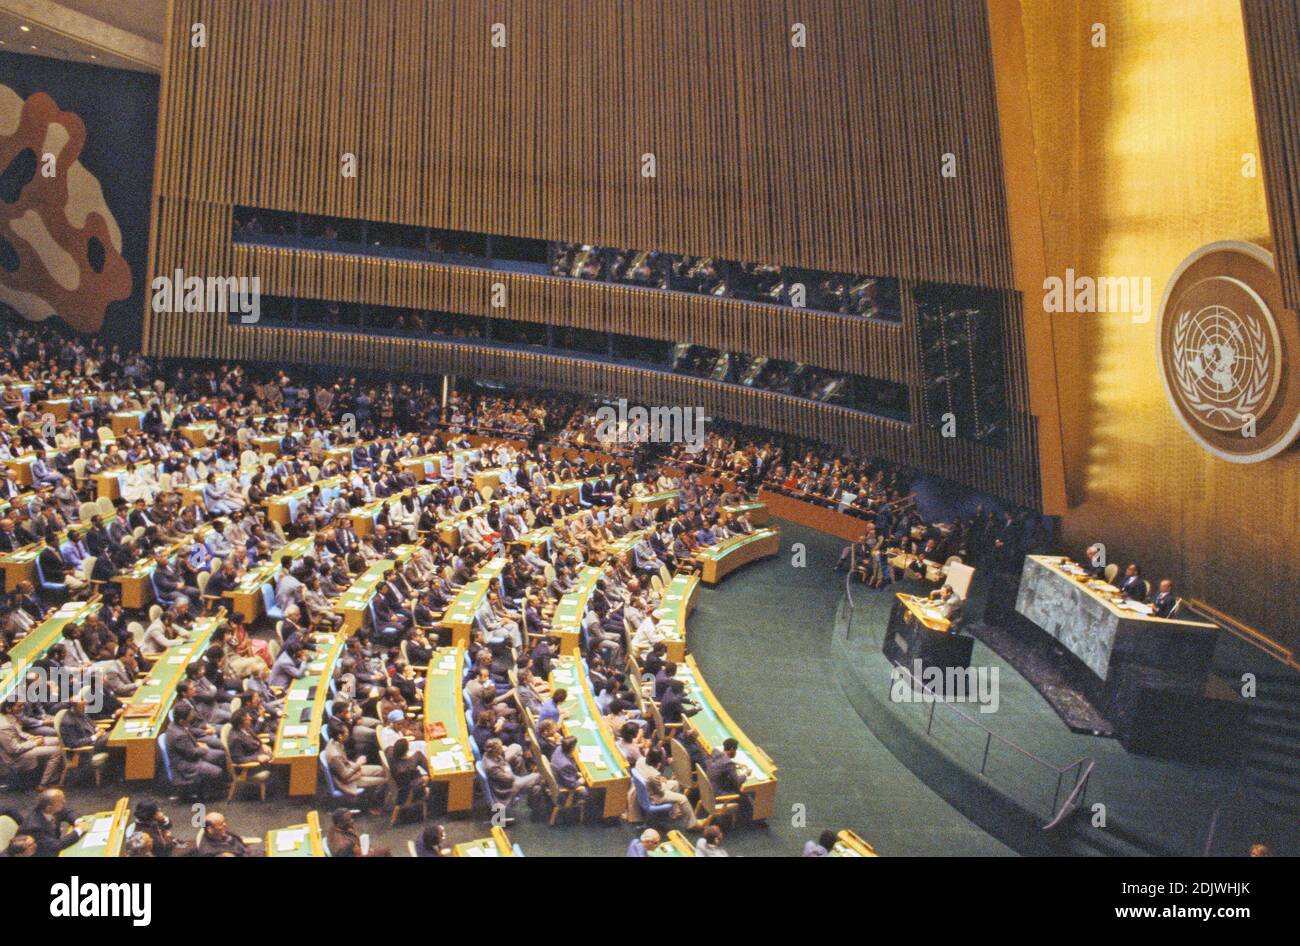 President Fidel Castro of Cuba addresses the United Nations General Assembly in New York City, NY, USA on October 15, 1979. Castro's speech discussed the disparity between the world's rich and the world's poor. Photo by Arnie Sachs/CNP/ABACAPRESS.COM Stock Photo